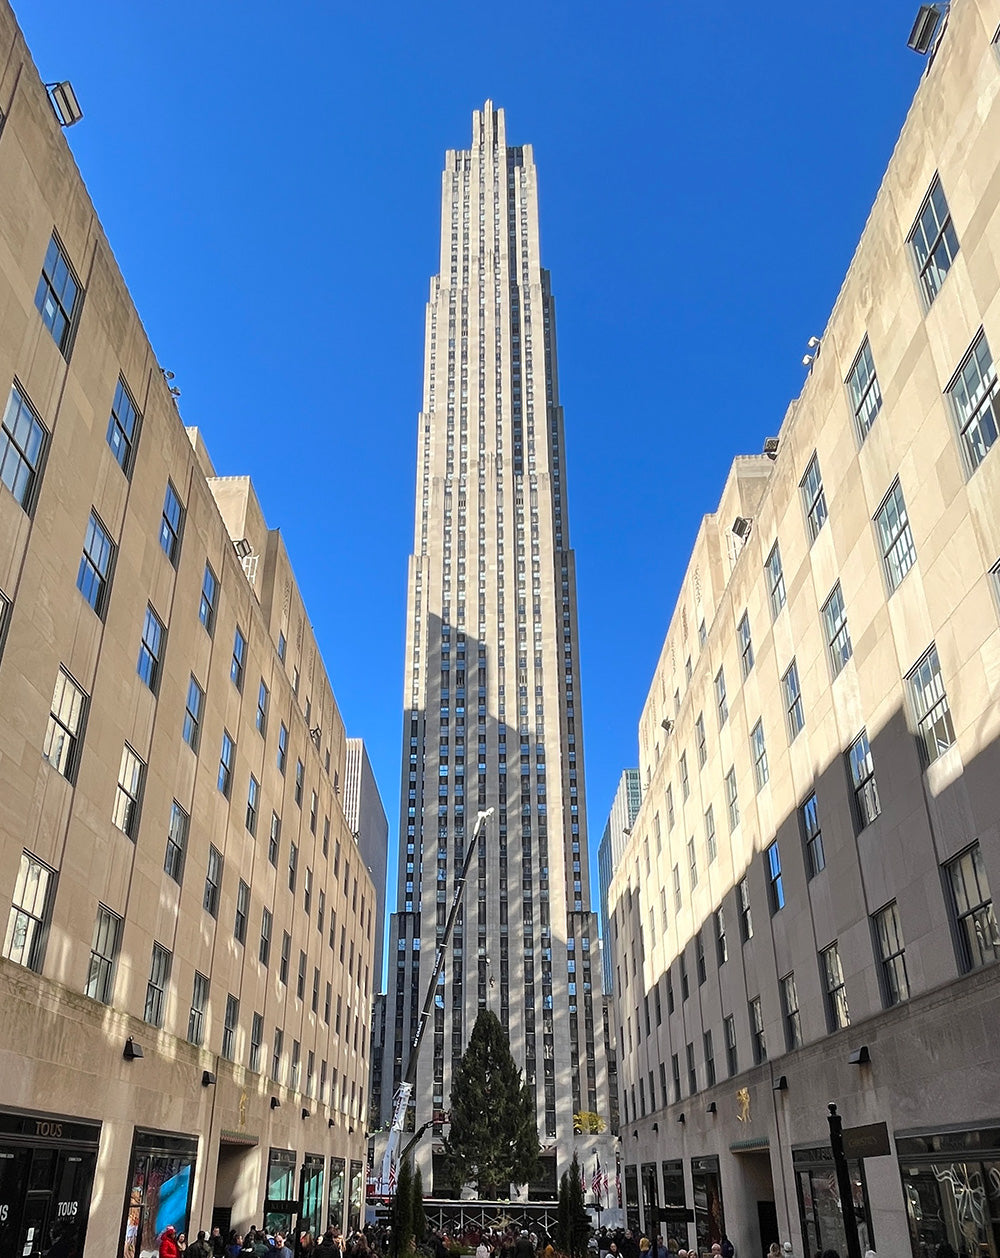 View of 30 Rockefeller Center from Fifth Avenue.